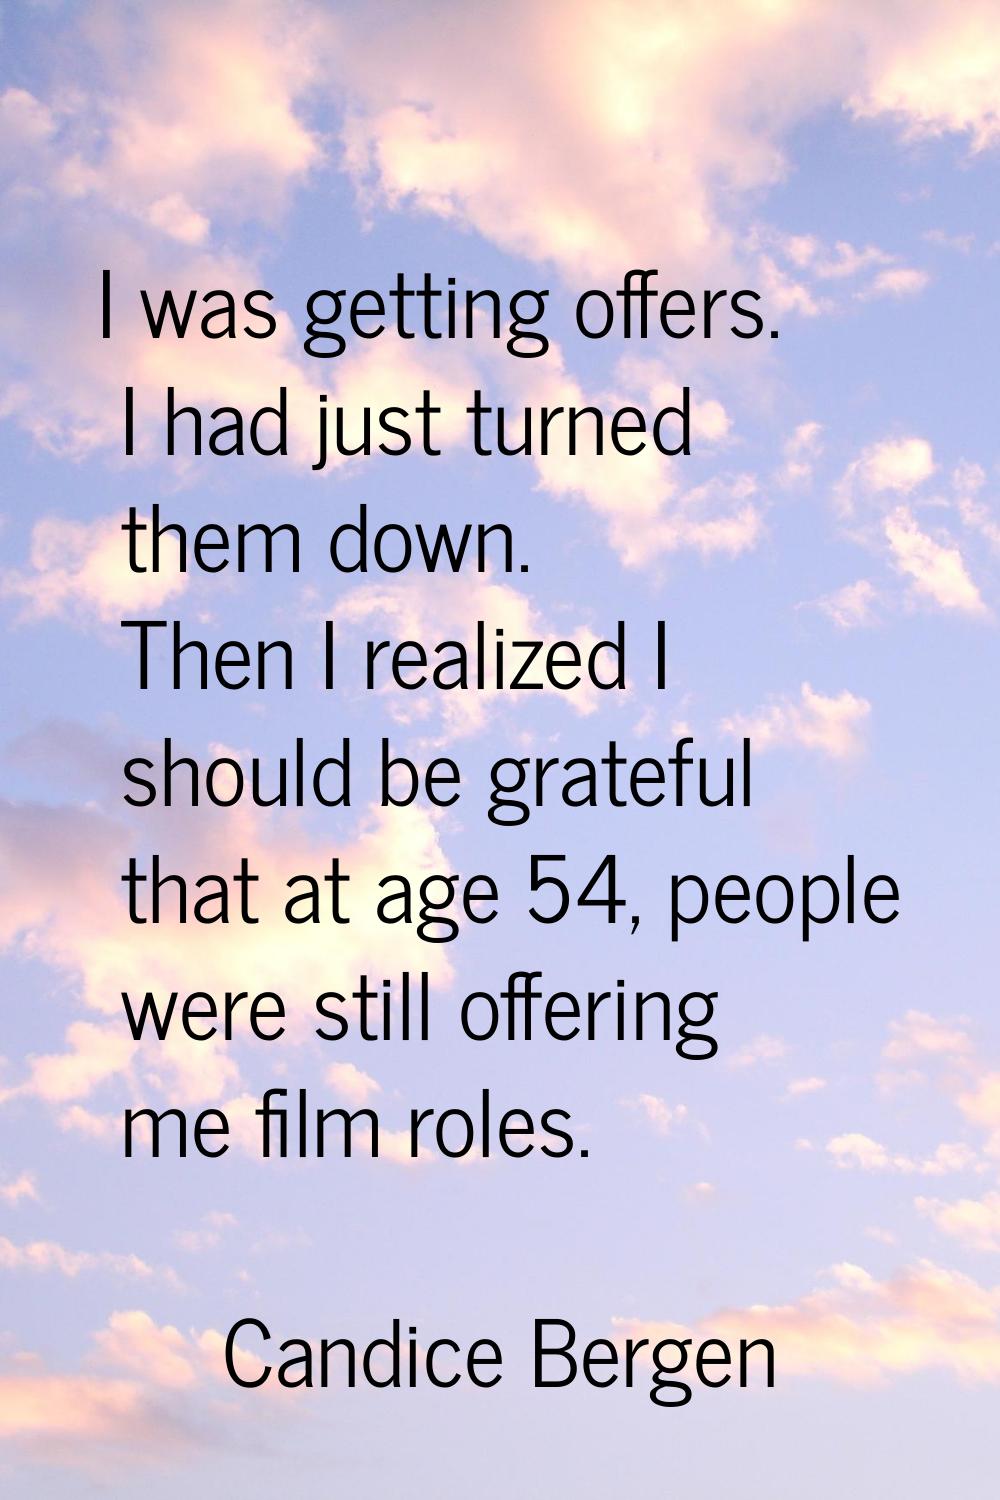 I was getting offers. I had just turned them down. Then I realized I should be grateful that at age